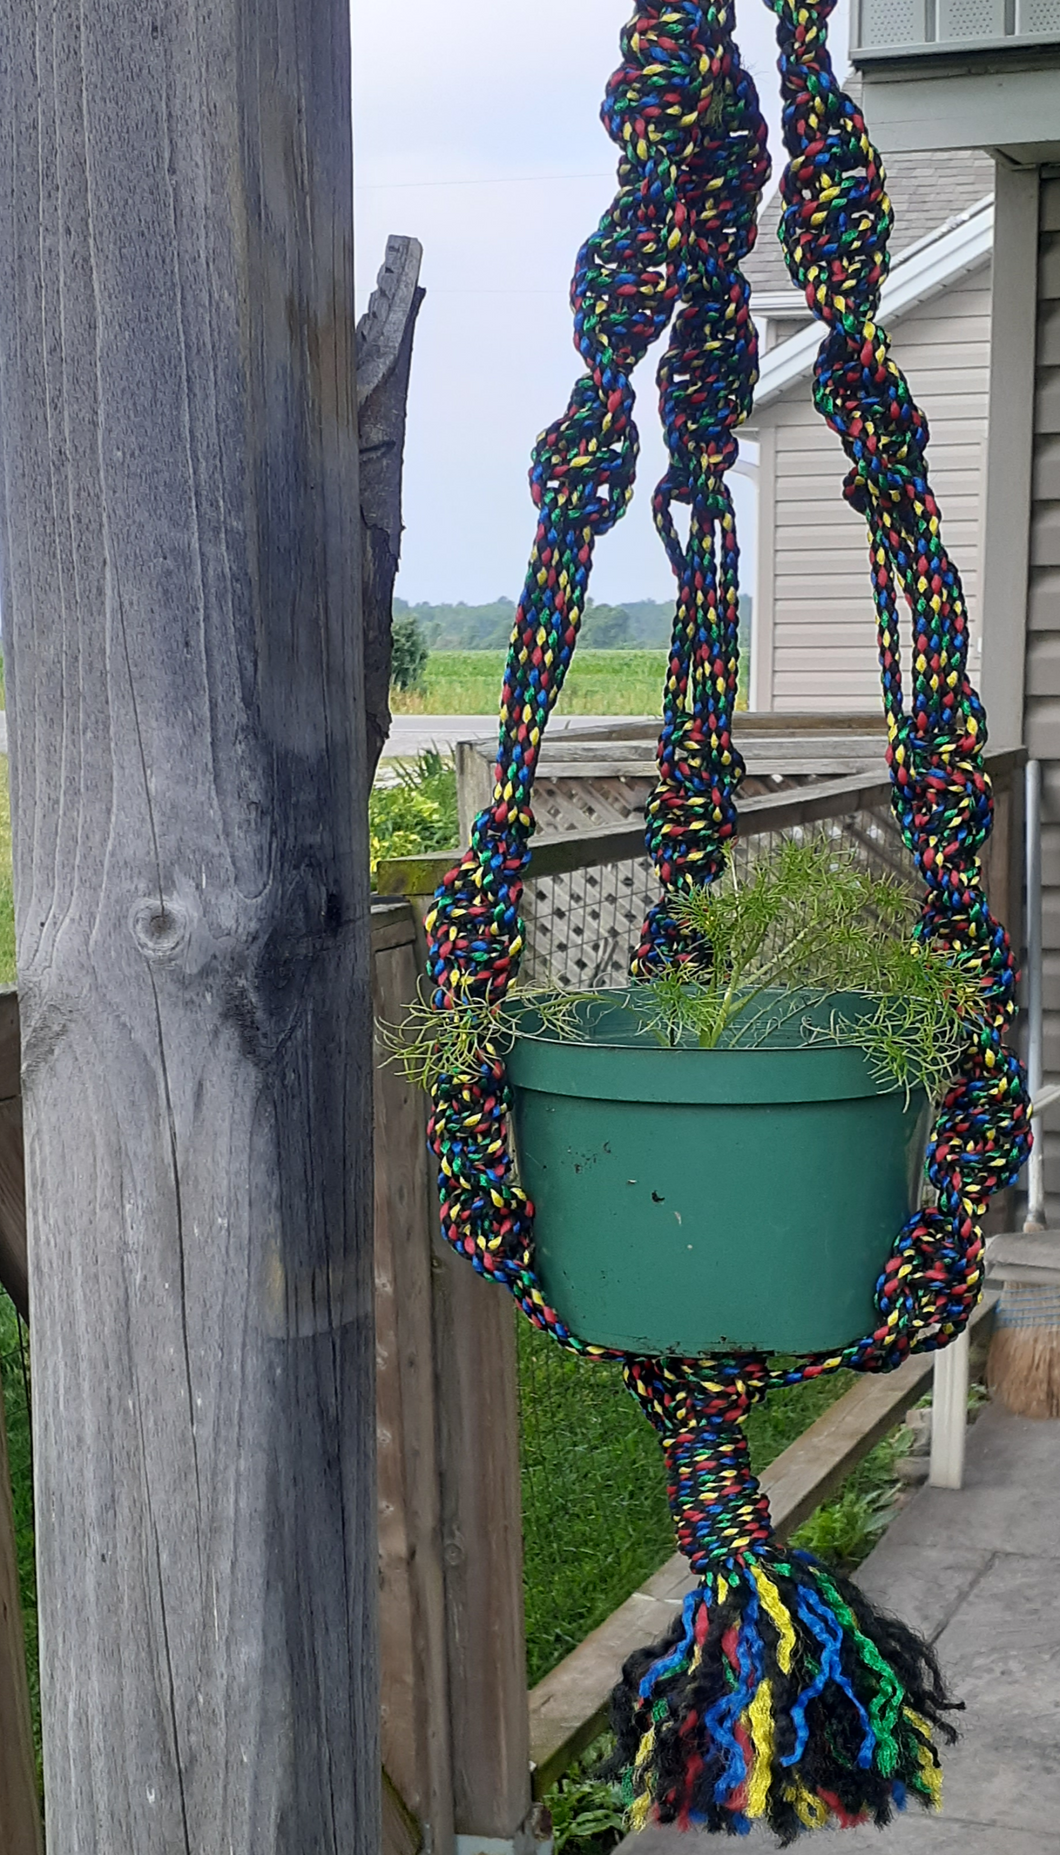 picture shows a macrame plant hangar made with red, green, blue, and yellow cord